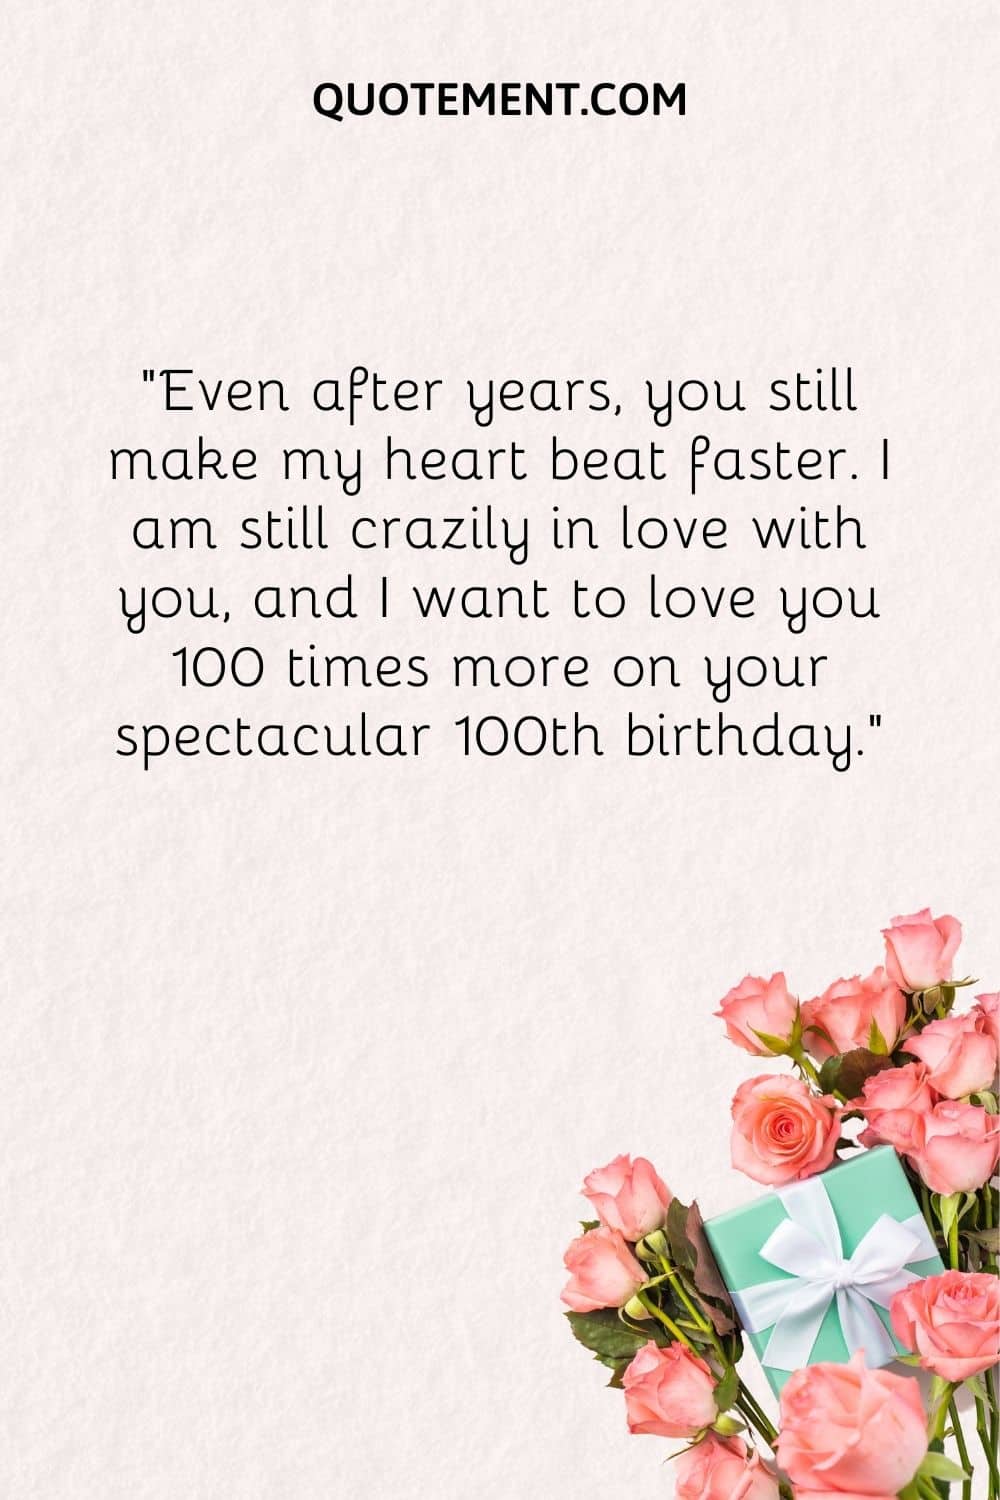 I am still crazily in love with you, and I want to love you 100 times more on your spectacular 100th birthday.